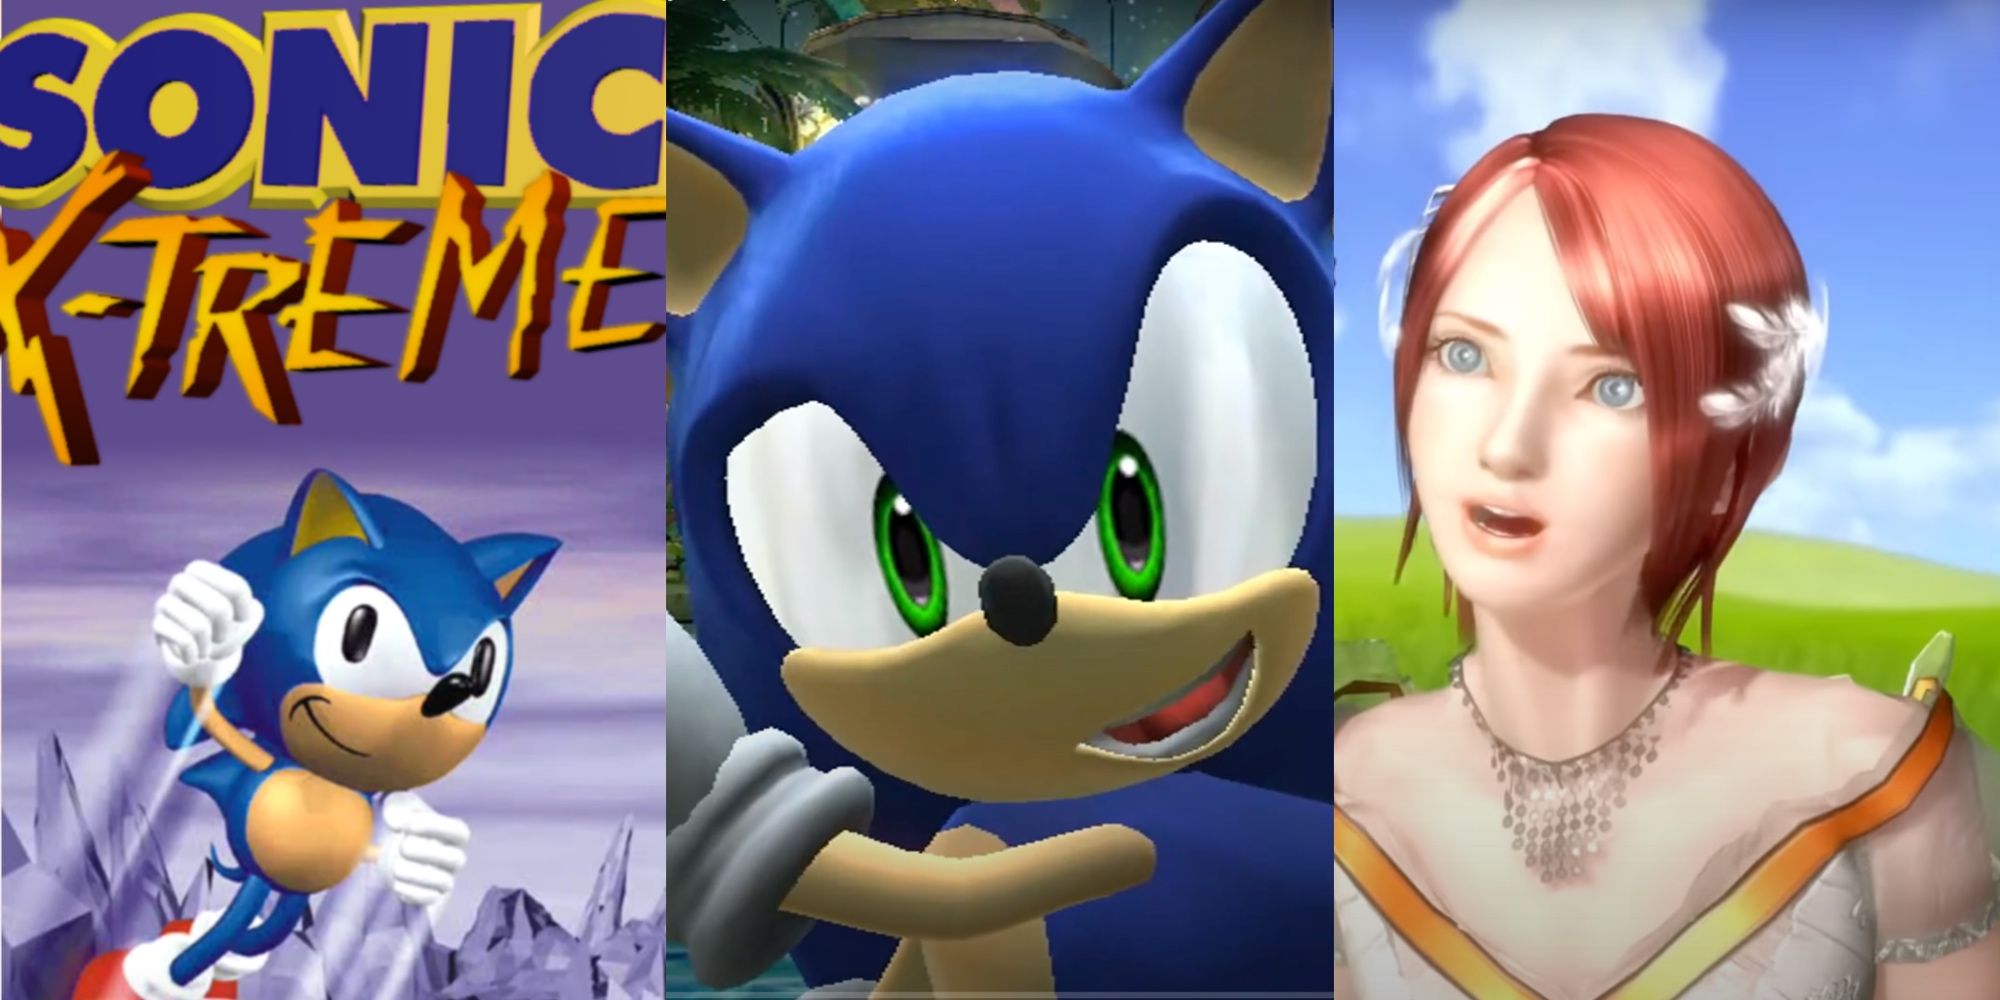 Cover art for sonic-x-treme, sonic breaking the 4th wall and princess Elise close-up